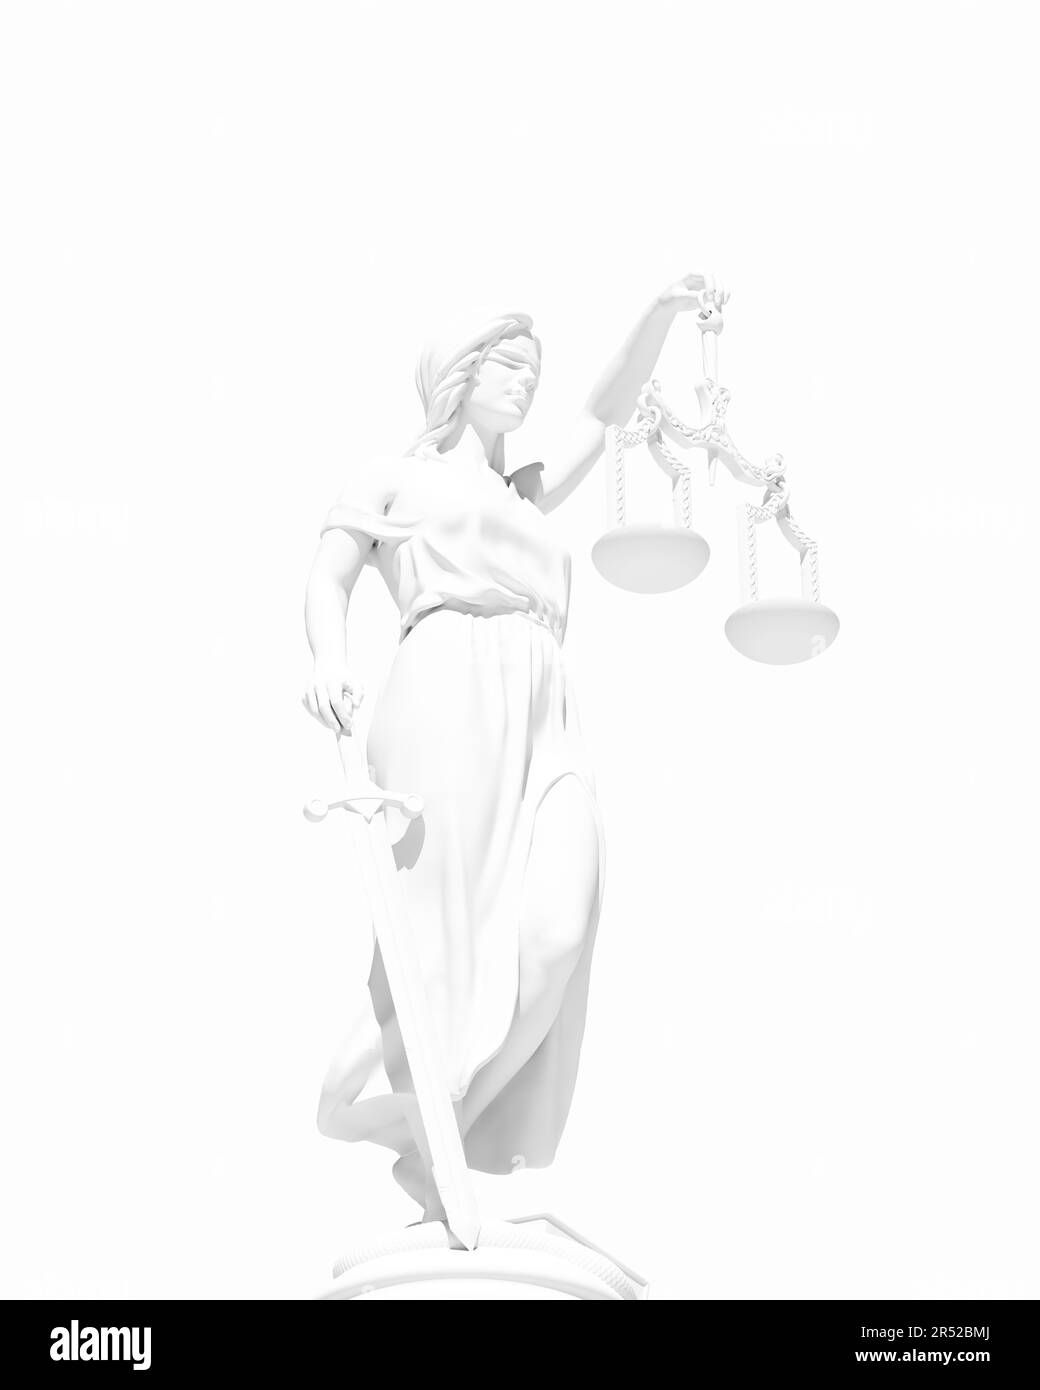 White Lady Justice Statue Personification of the Judicial System Traditional Protection and Balance Moral Force for Good and Lawfare White Background Stock Photo